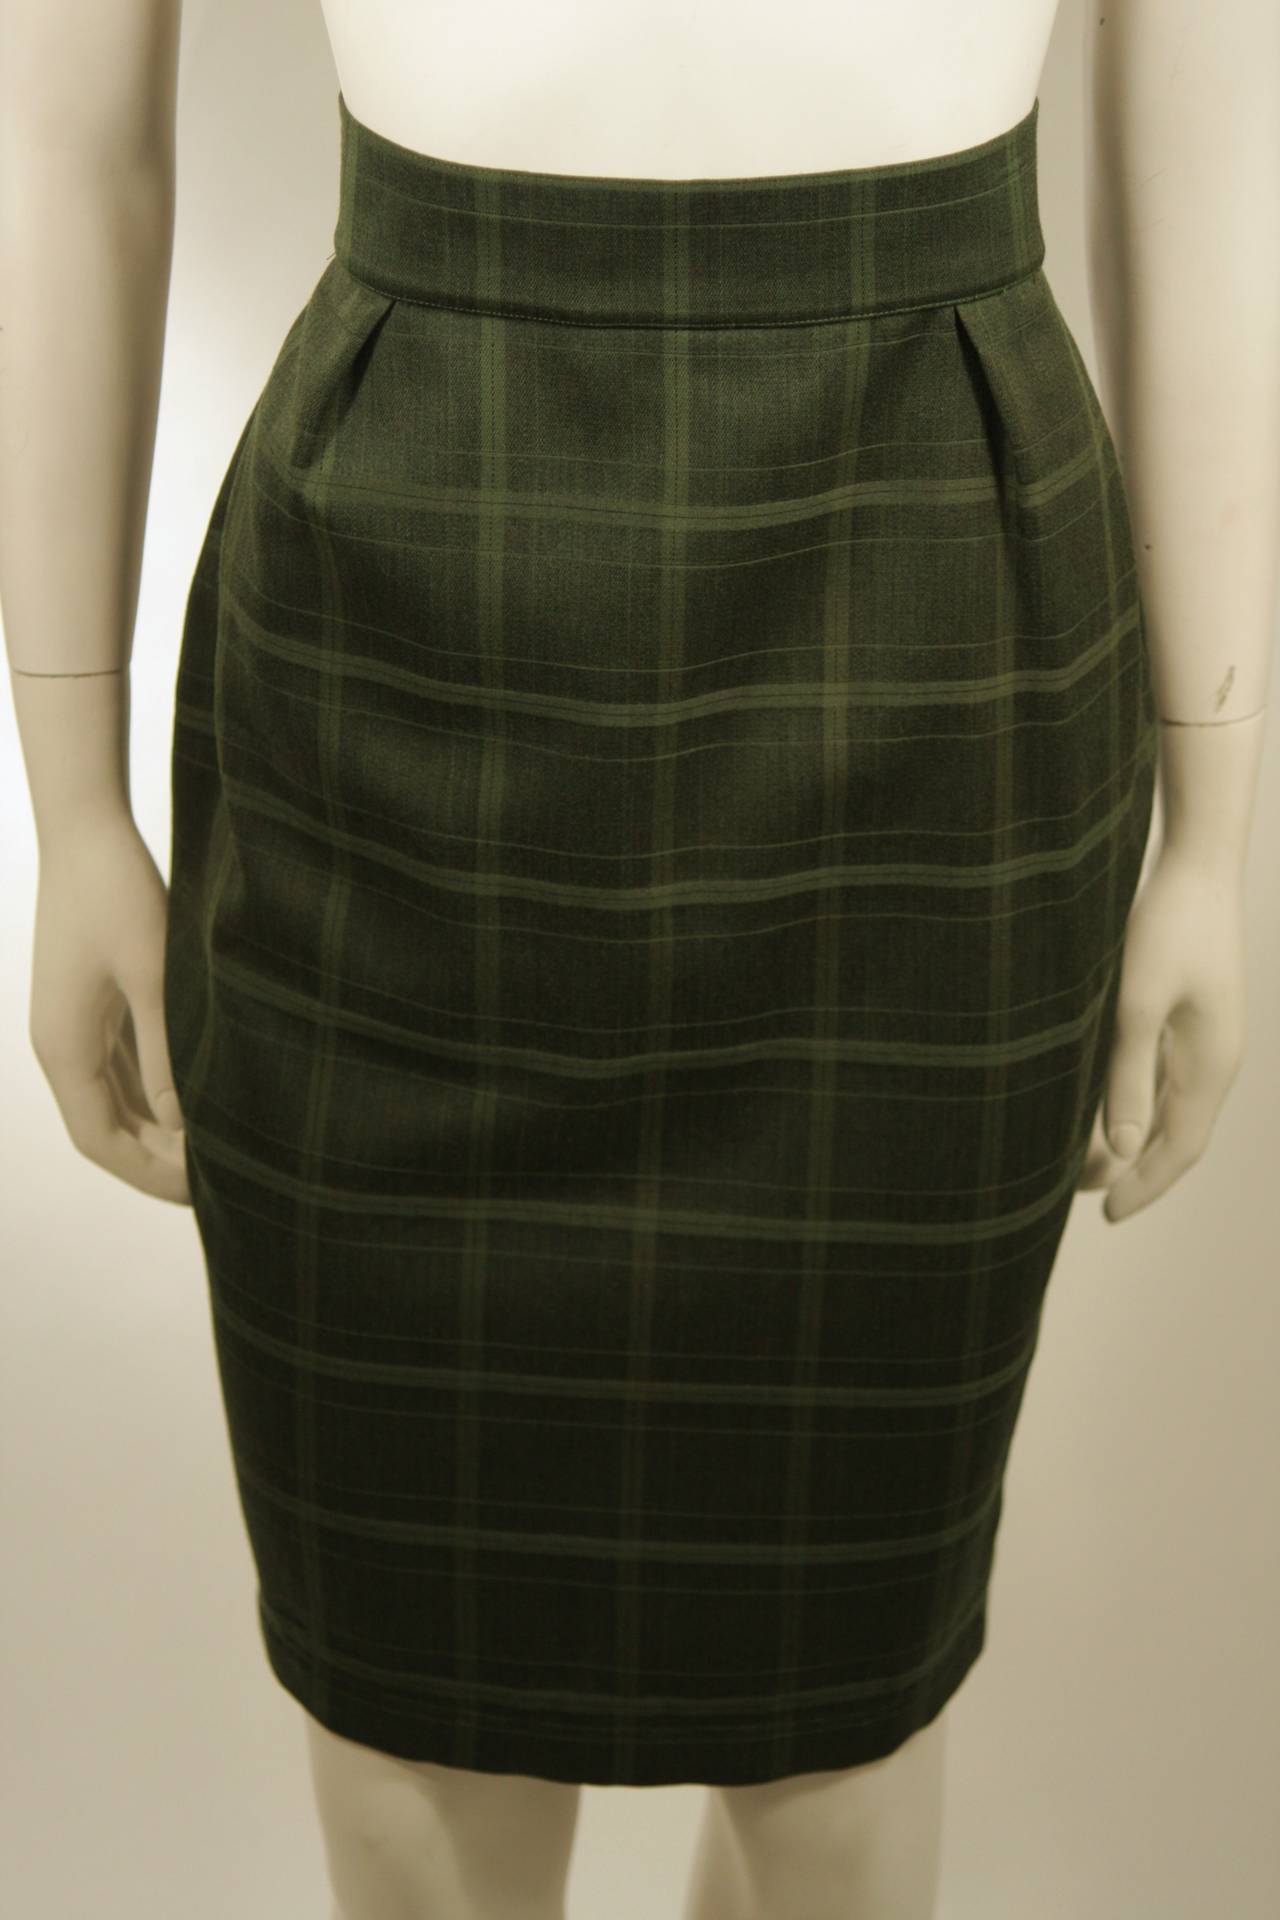 Thierry Mugler Green Plaid Skirt Suit with Belt Size 40 4